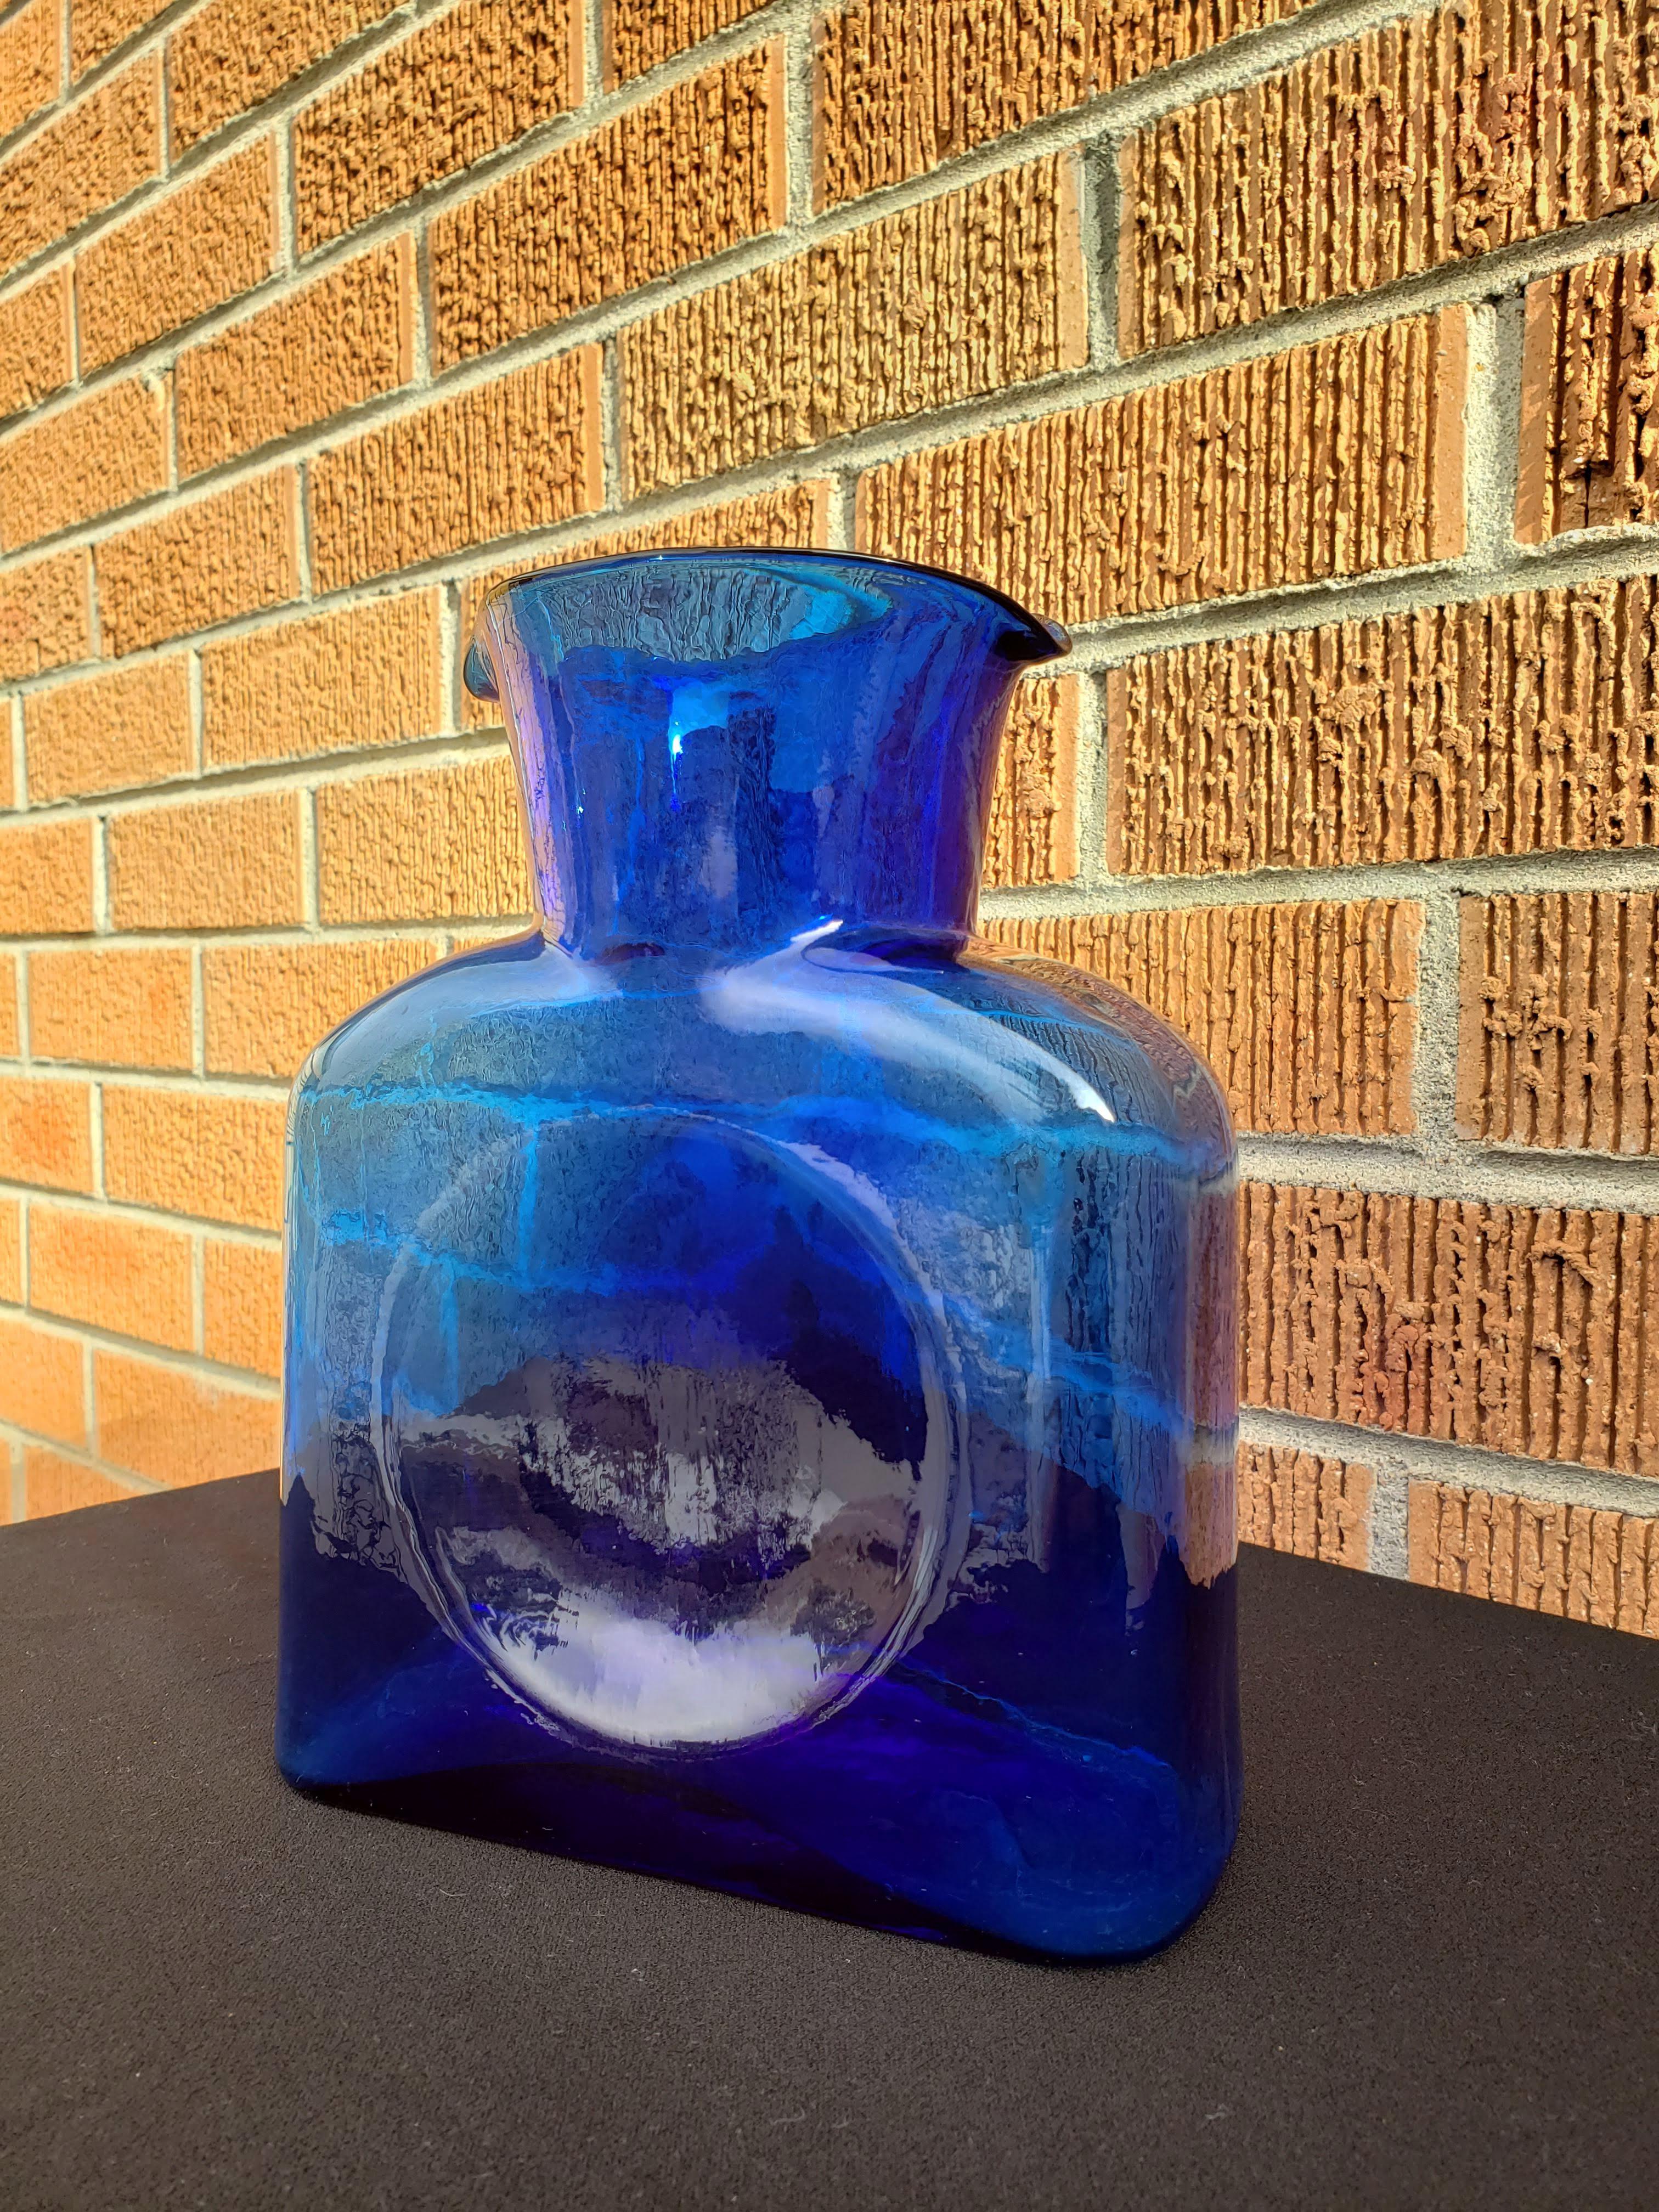 Fabulous cobalt blue Blenko iconic water bottle with sandblasted etching on base with the maker, Blenko, and the year 2002. Would be great as a vase with white peonies or in a window to catch the light.